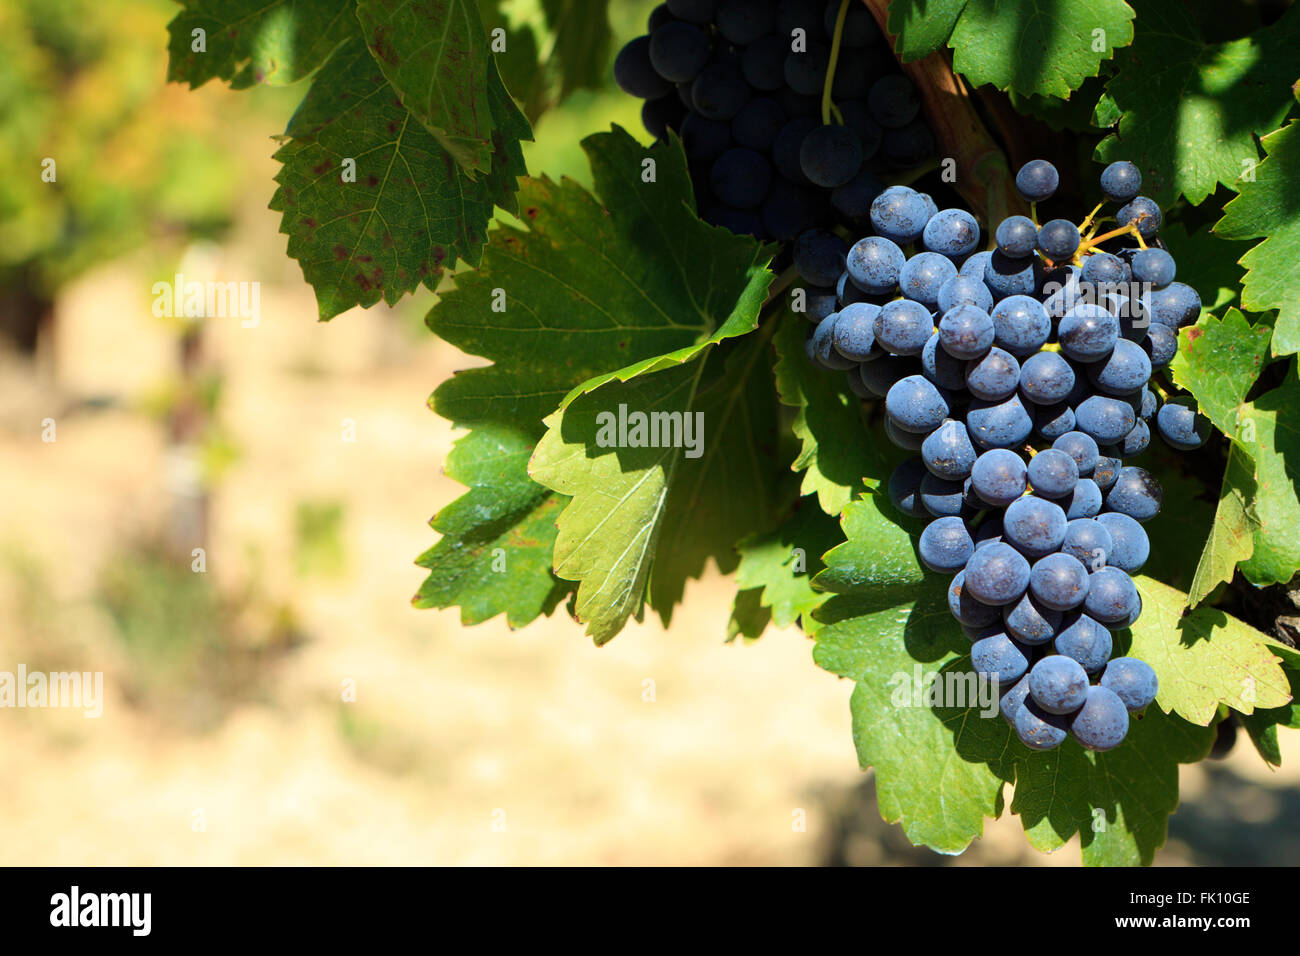 Red Wine grapes growing in a vineyard Banque D'Images